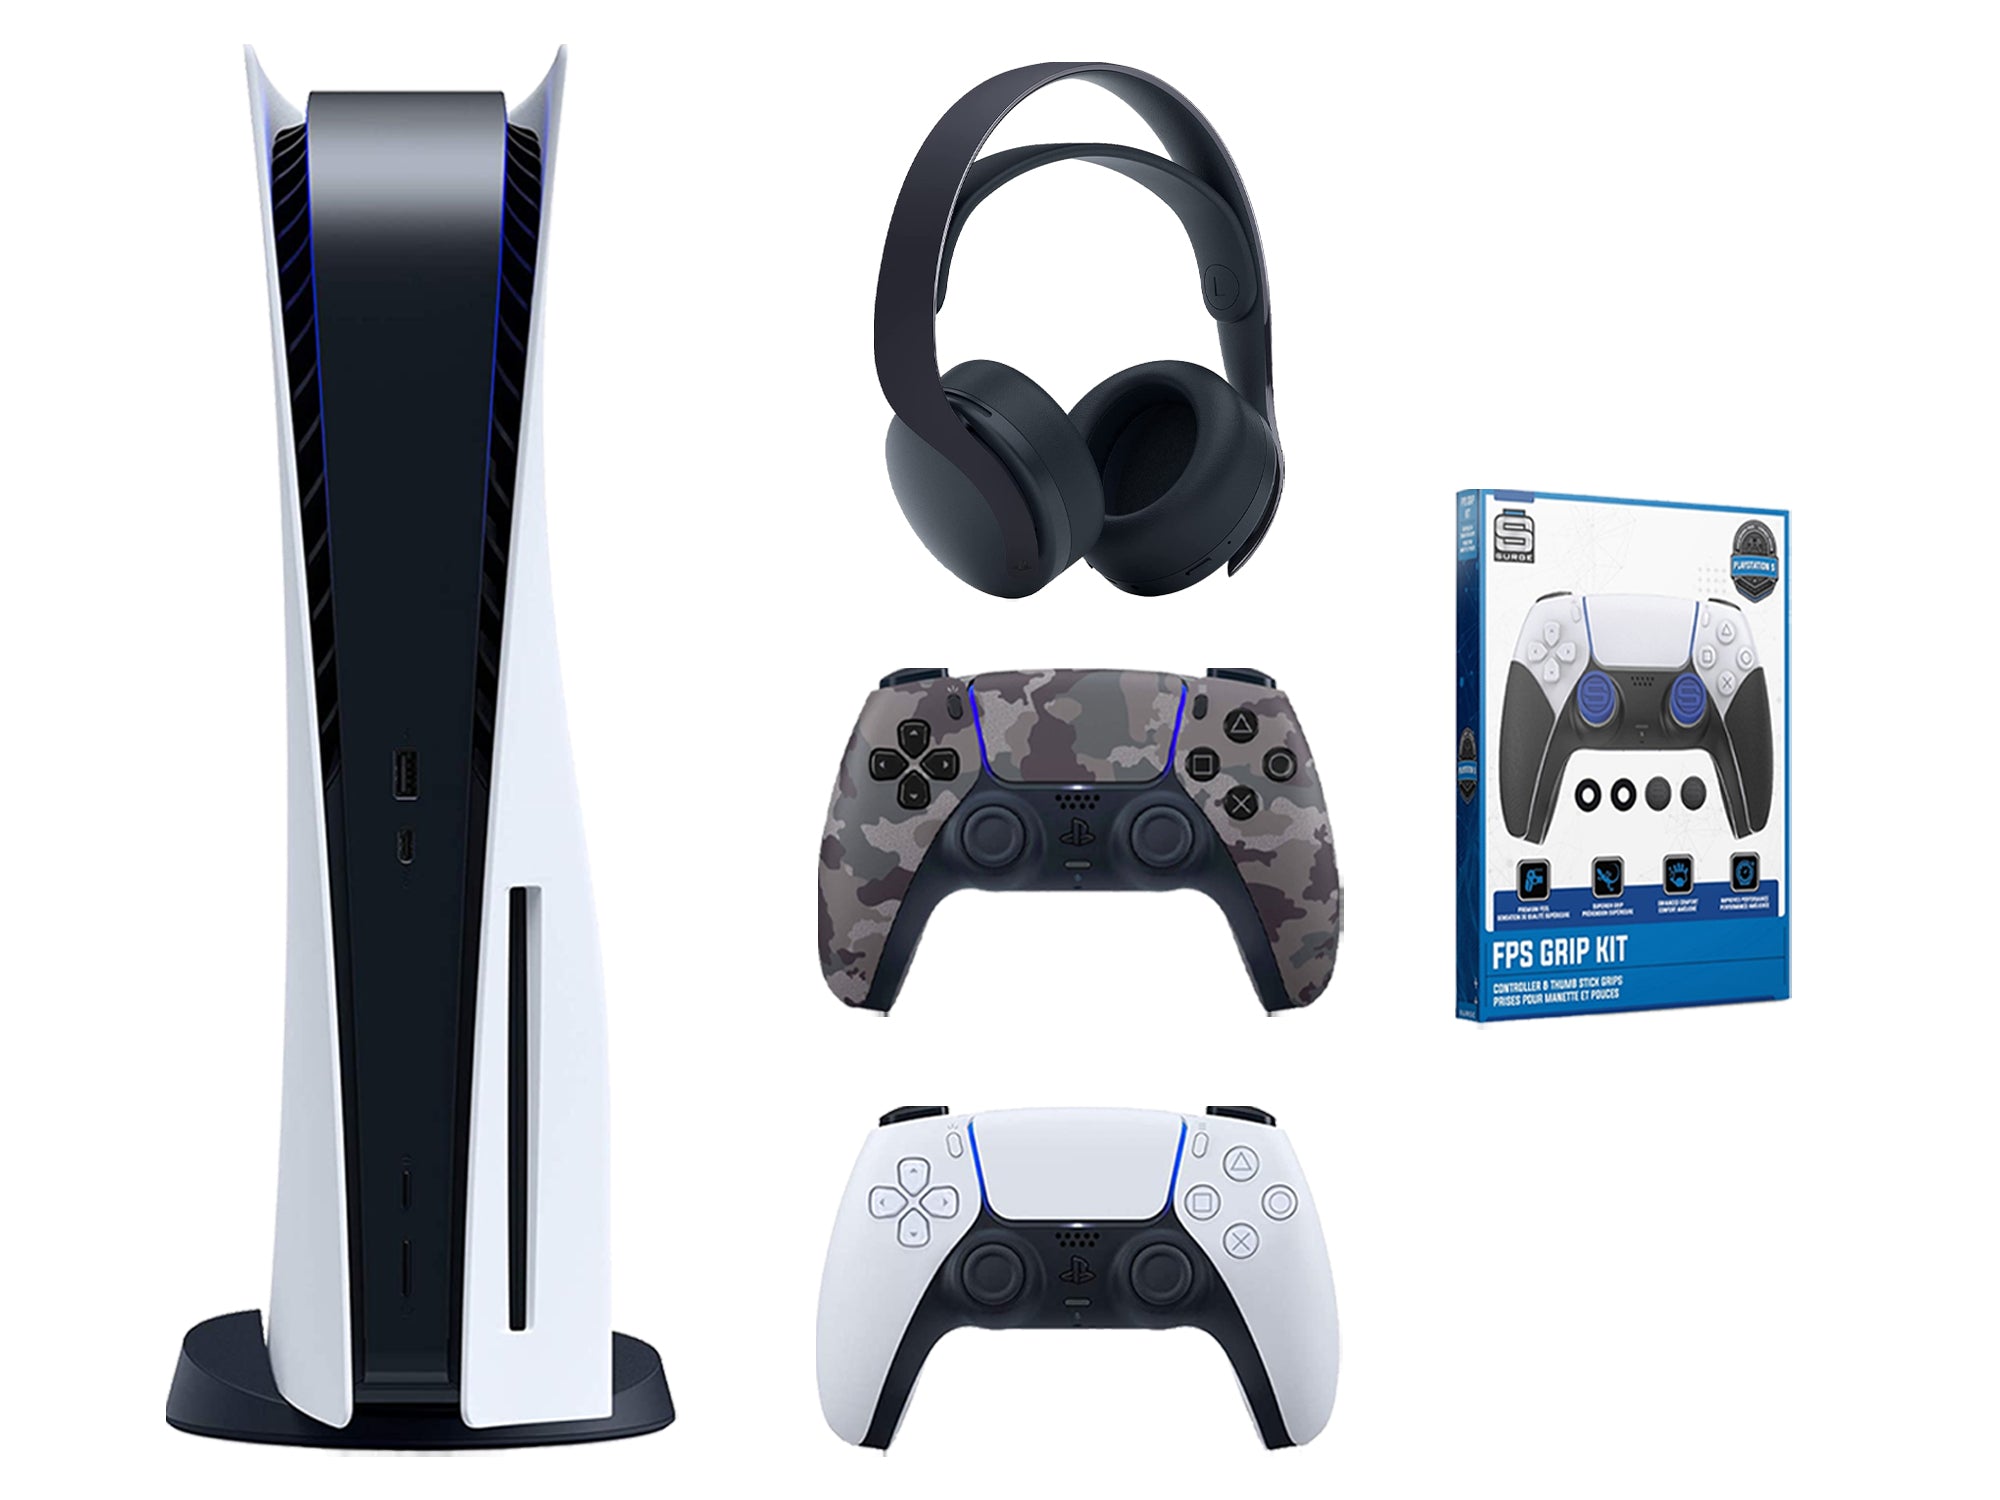 Sony Playstation 5 Disc Edition Bundle with Extra Gray Camo Controller, Black PULSE 3D Wireless Headset and FPS Grip Kit - Pro-Distributing